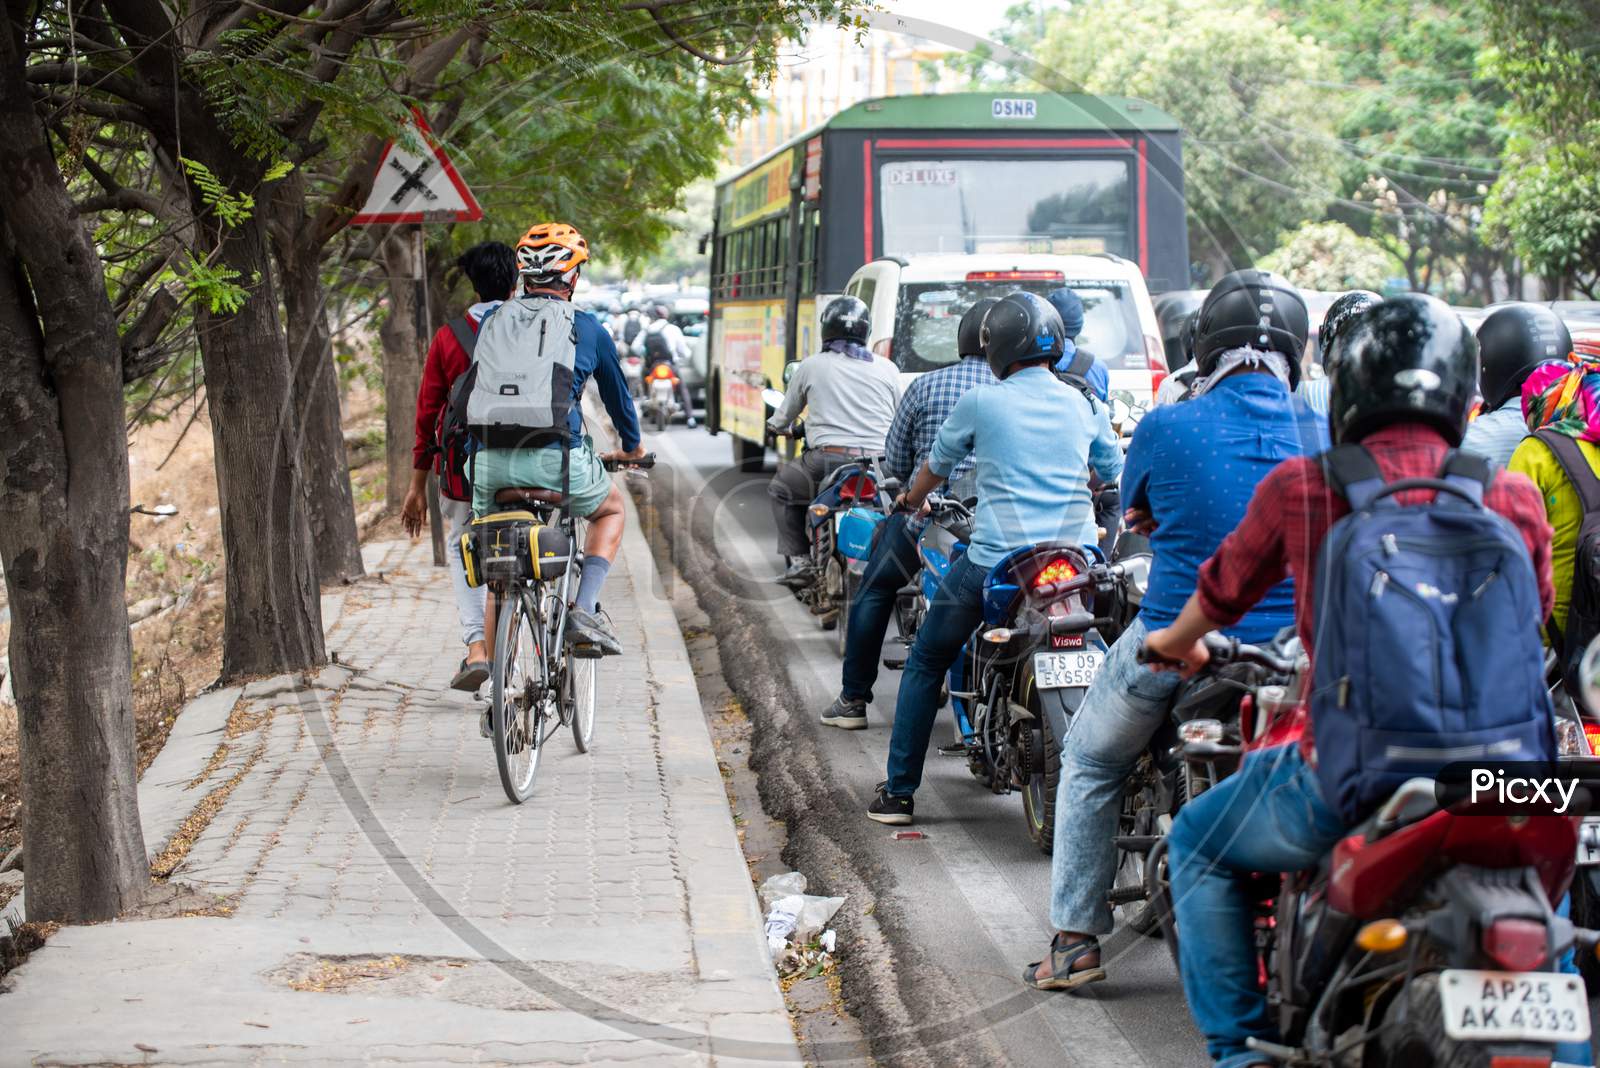 A man rides his bike on the footpath as the traffic halts on the road